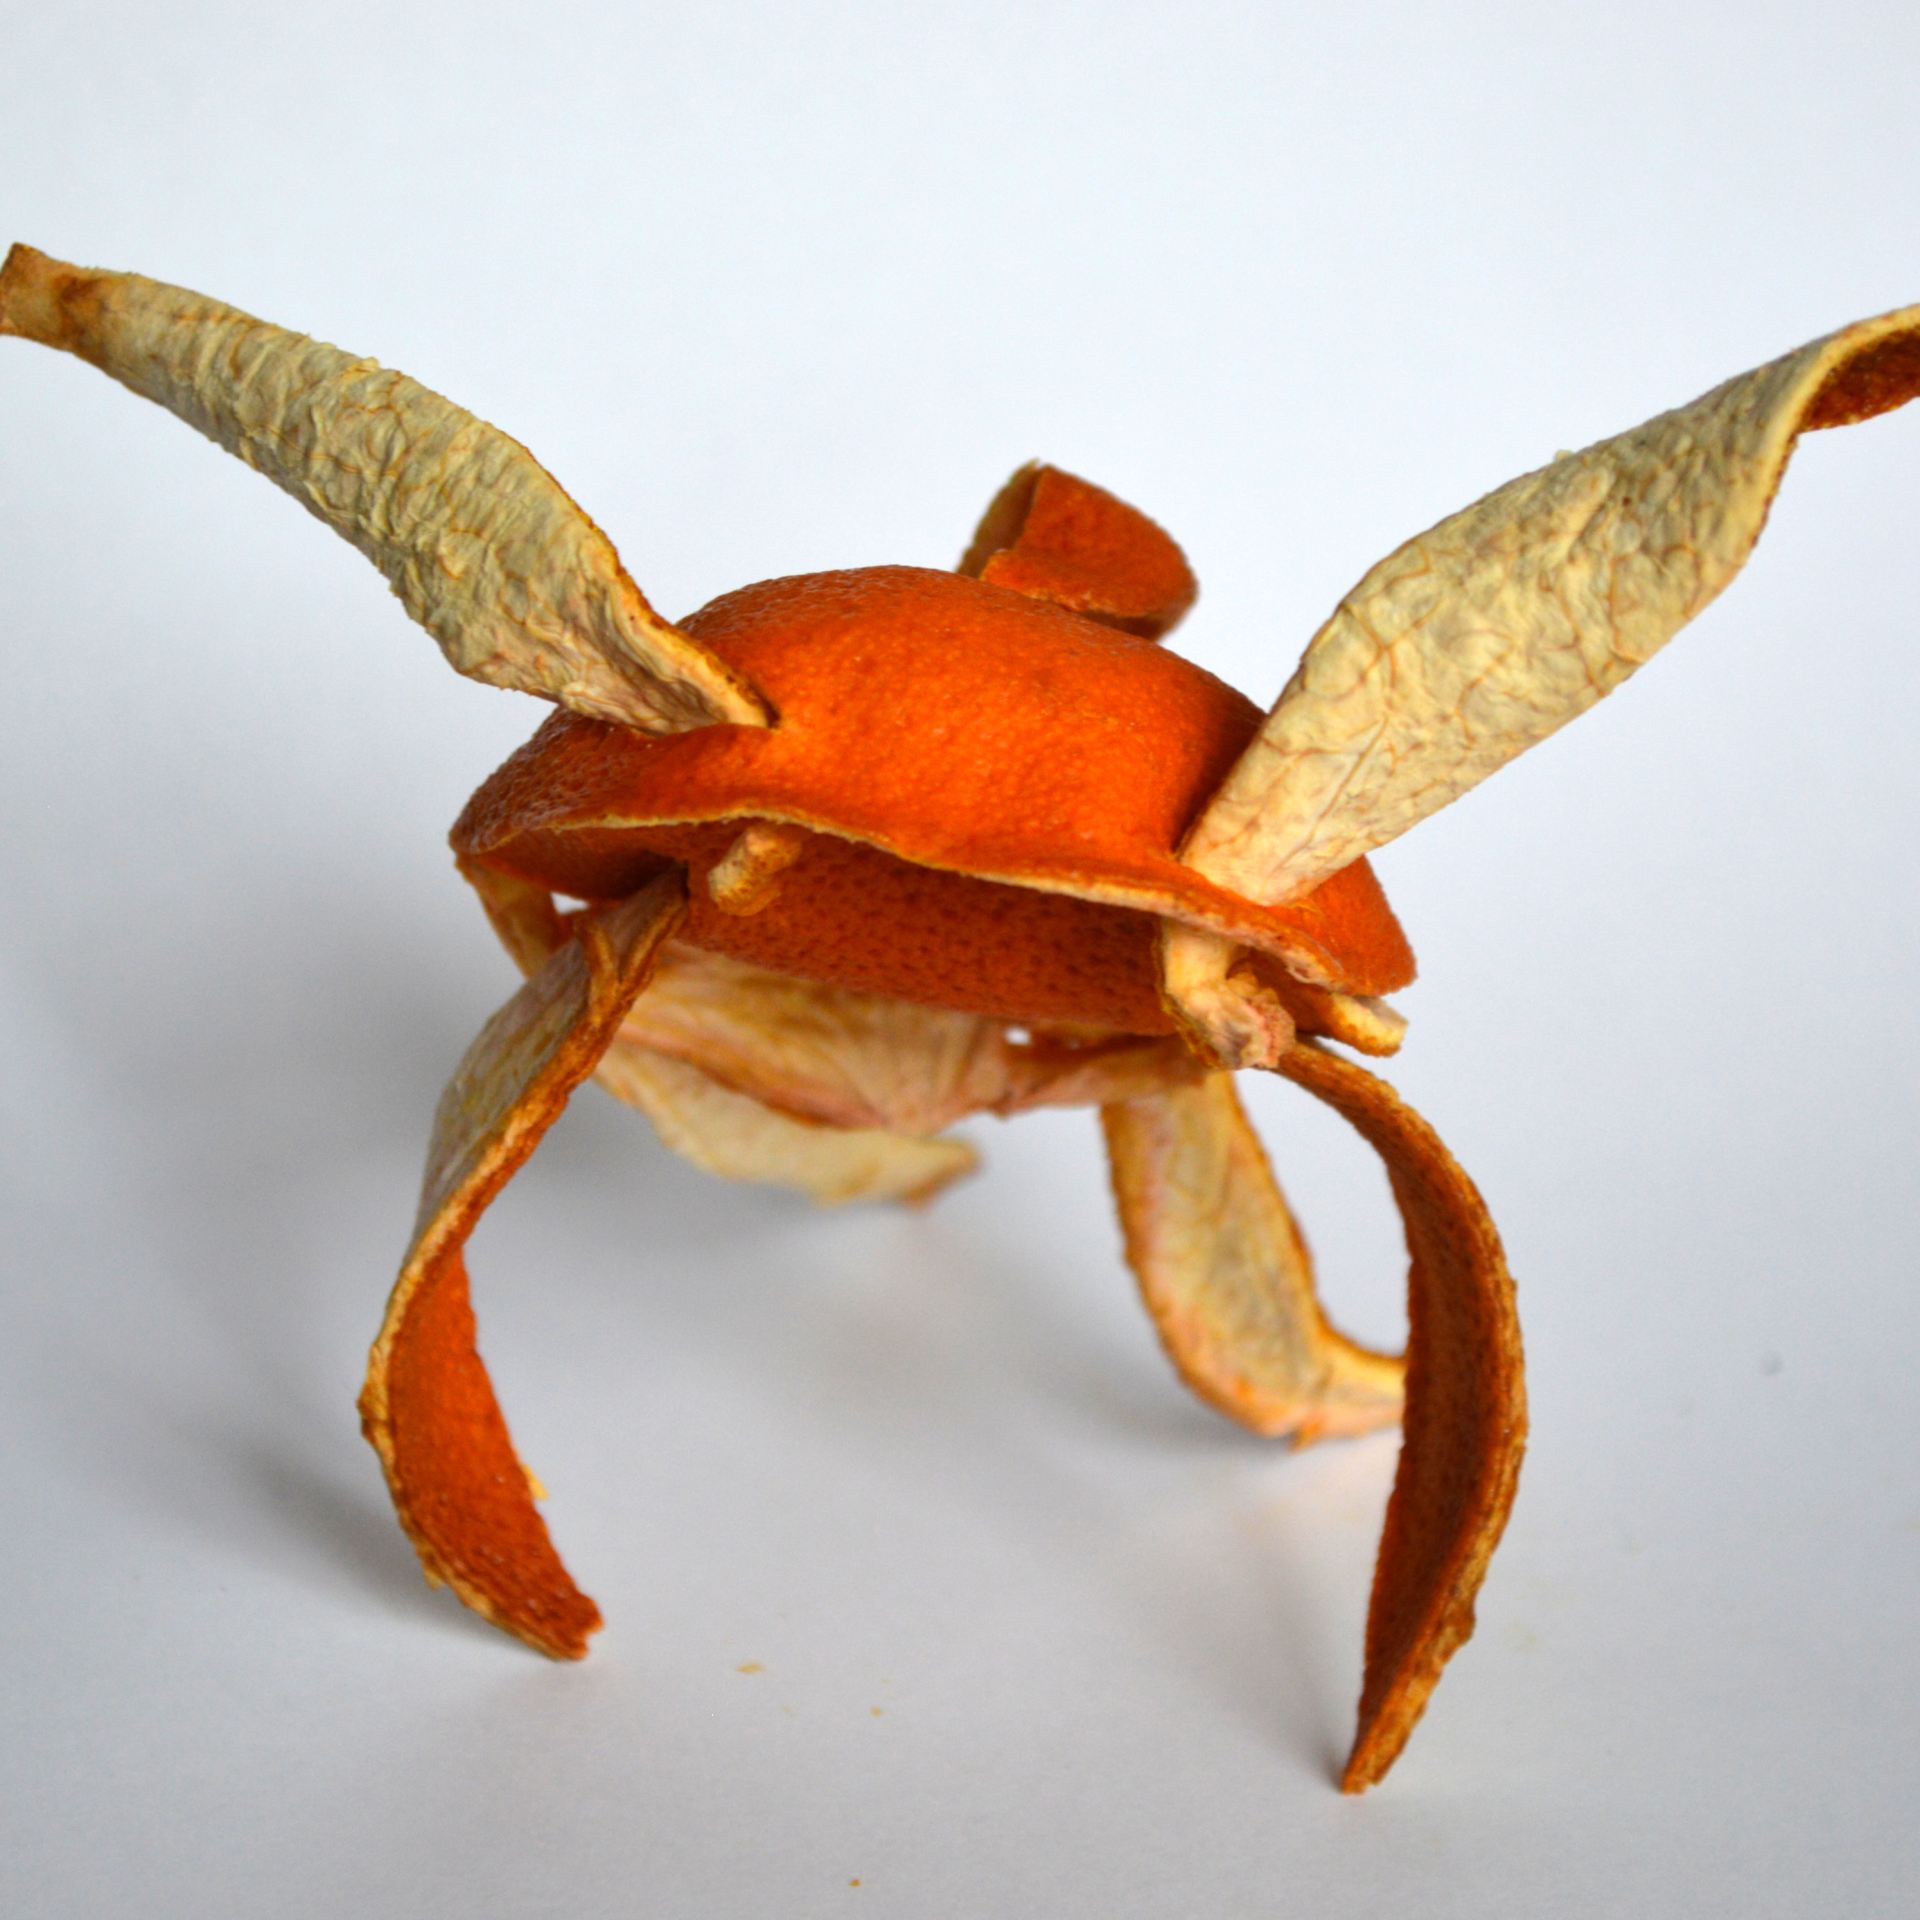 An image of an abstract sculpture made from orange peel.